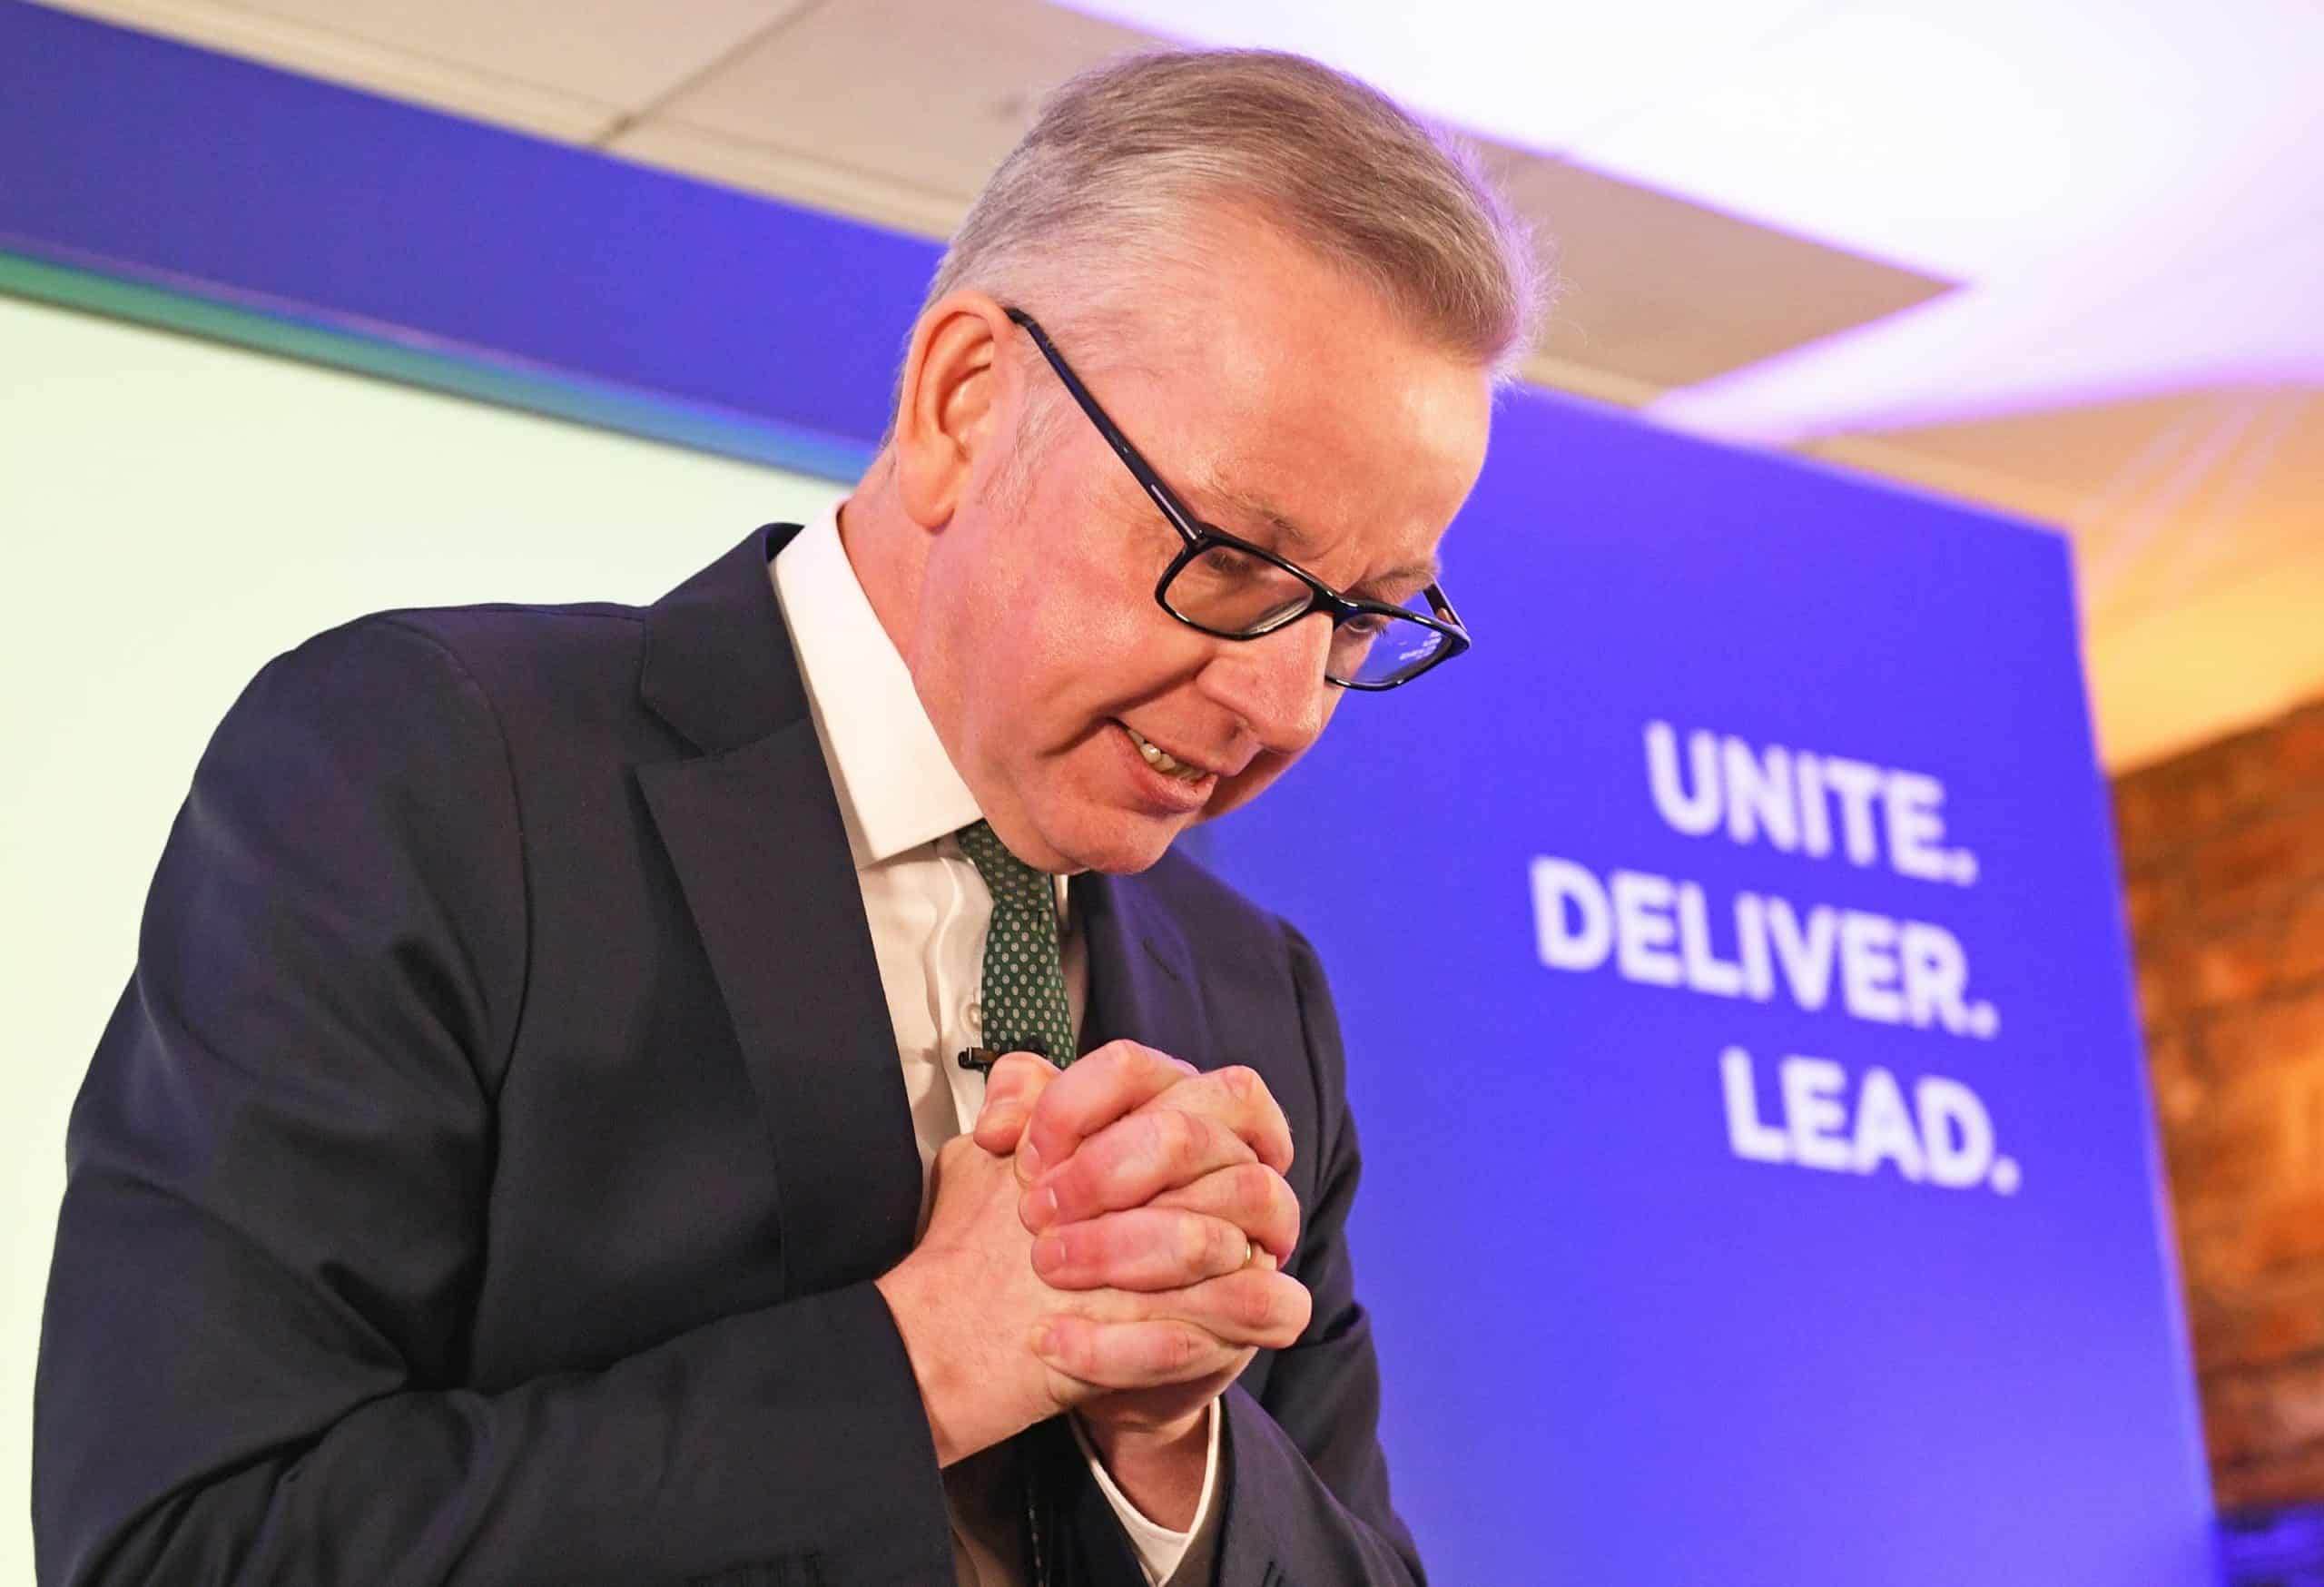 Watch: Michael Gove escorted by police after being approached by demonstrators